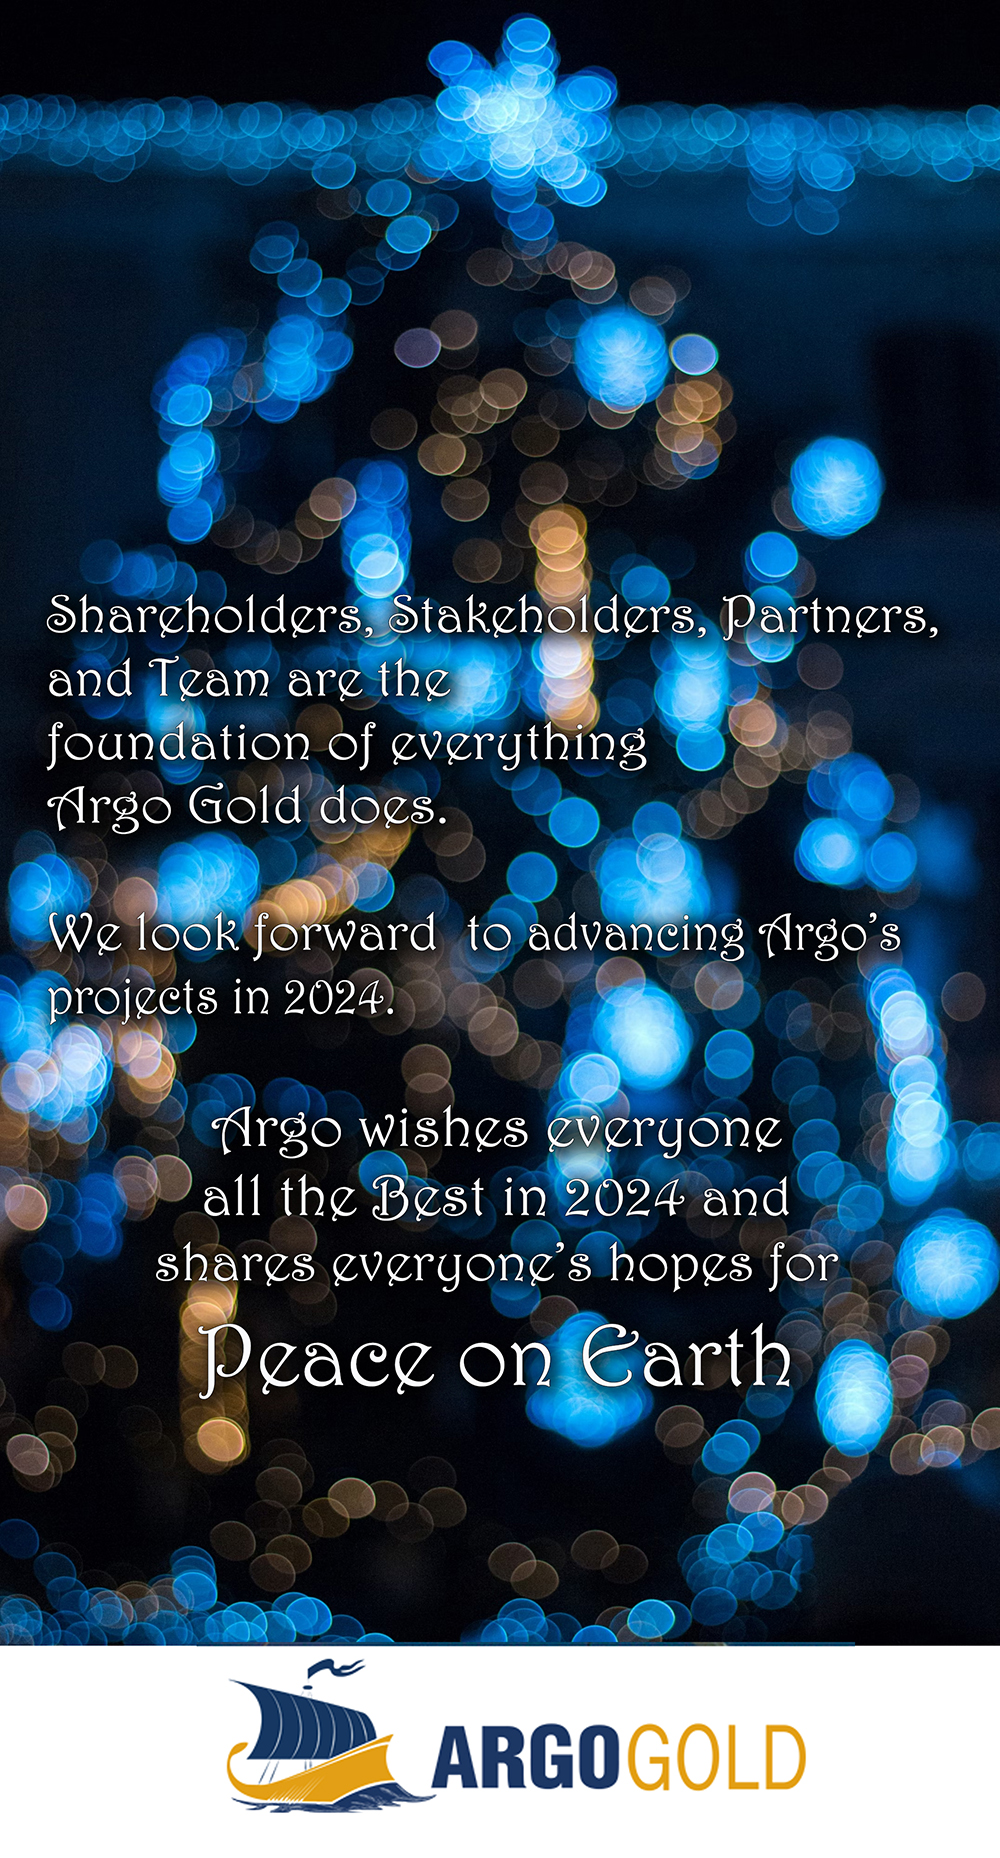 Argo Gold wishes everyone all the Best in 2024 and shares everyone's hopes for Peace on Earth